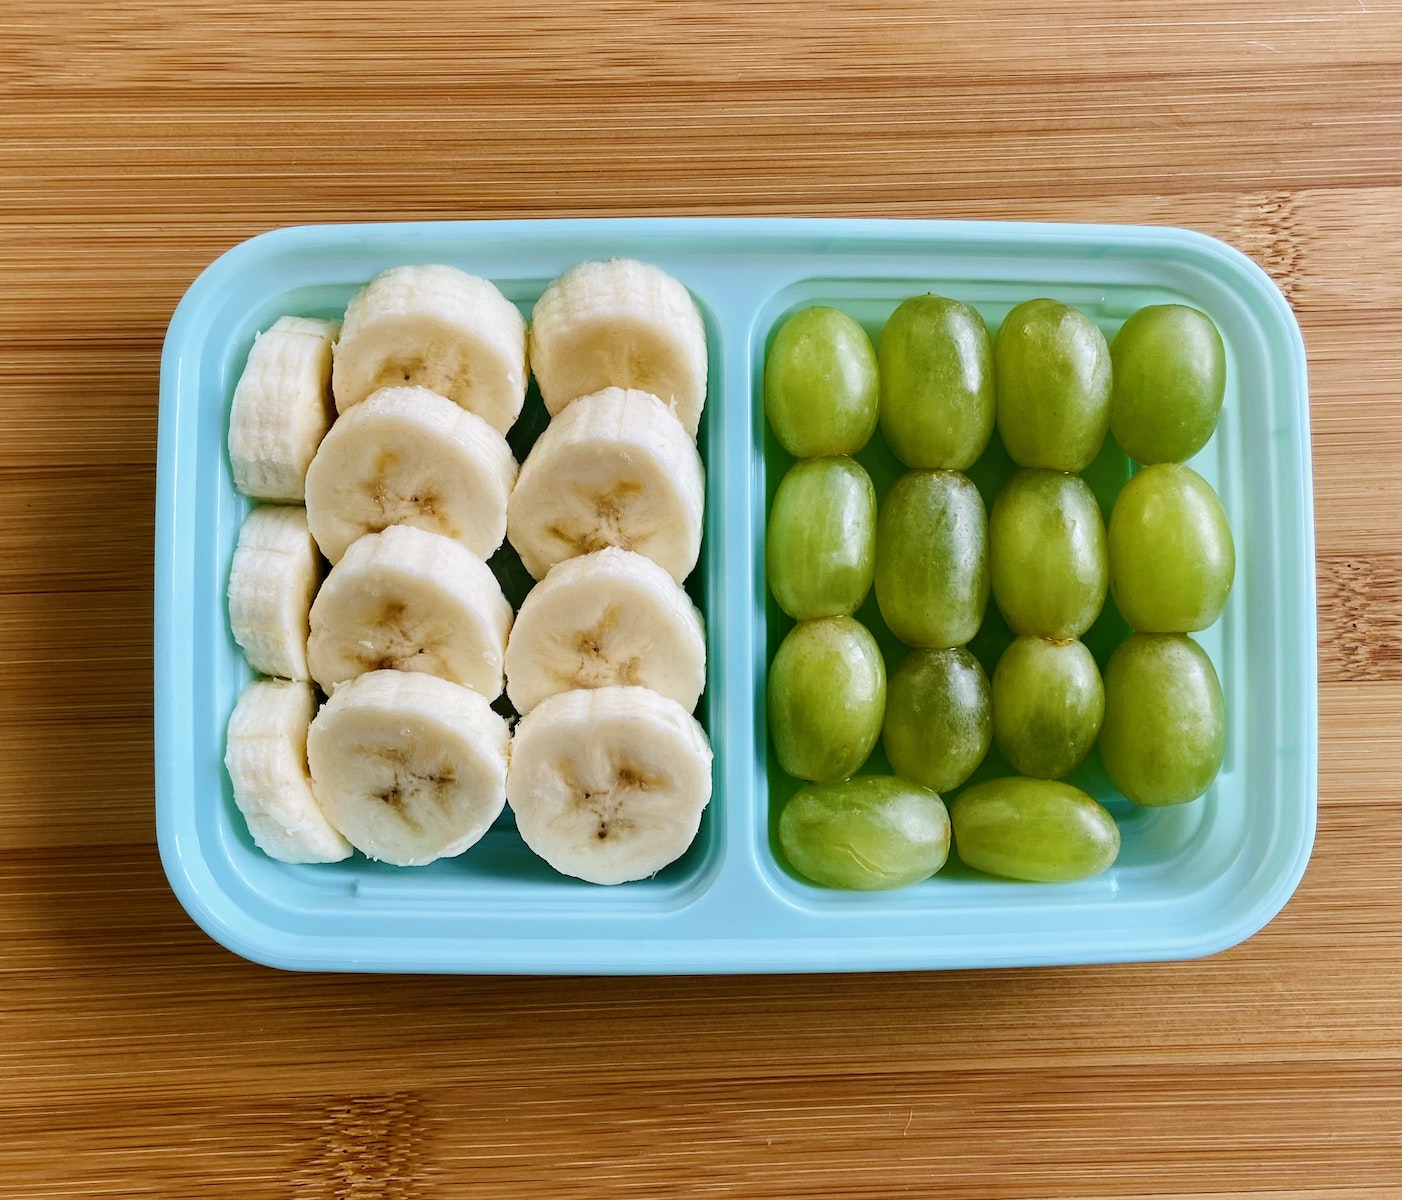 A Sliced Banana and Green Grapes on a Plastic Container